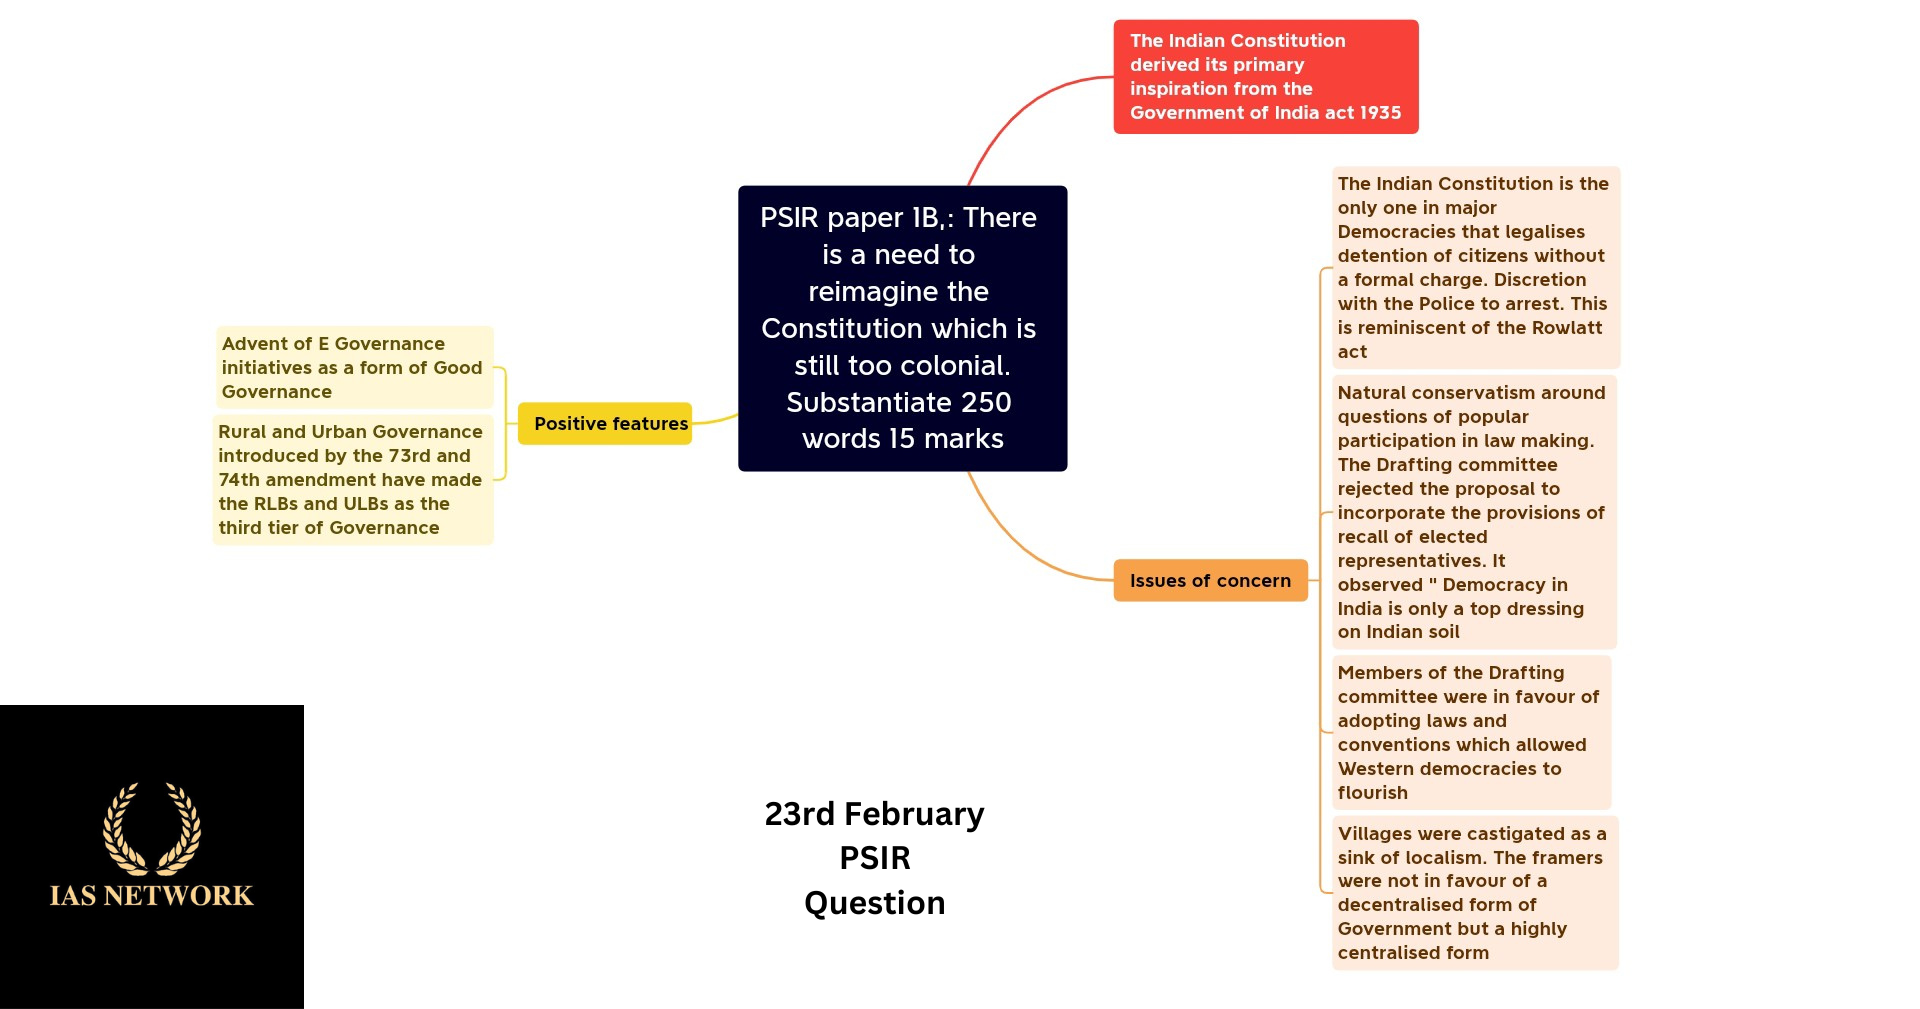 IAS NETWORK 23rd FEBRUARY PSIR QUESTION